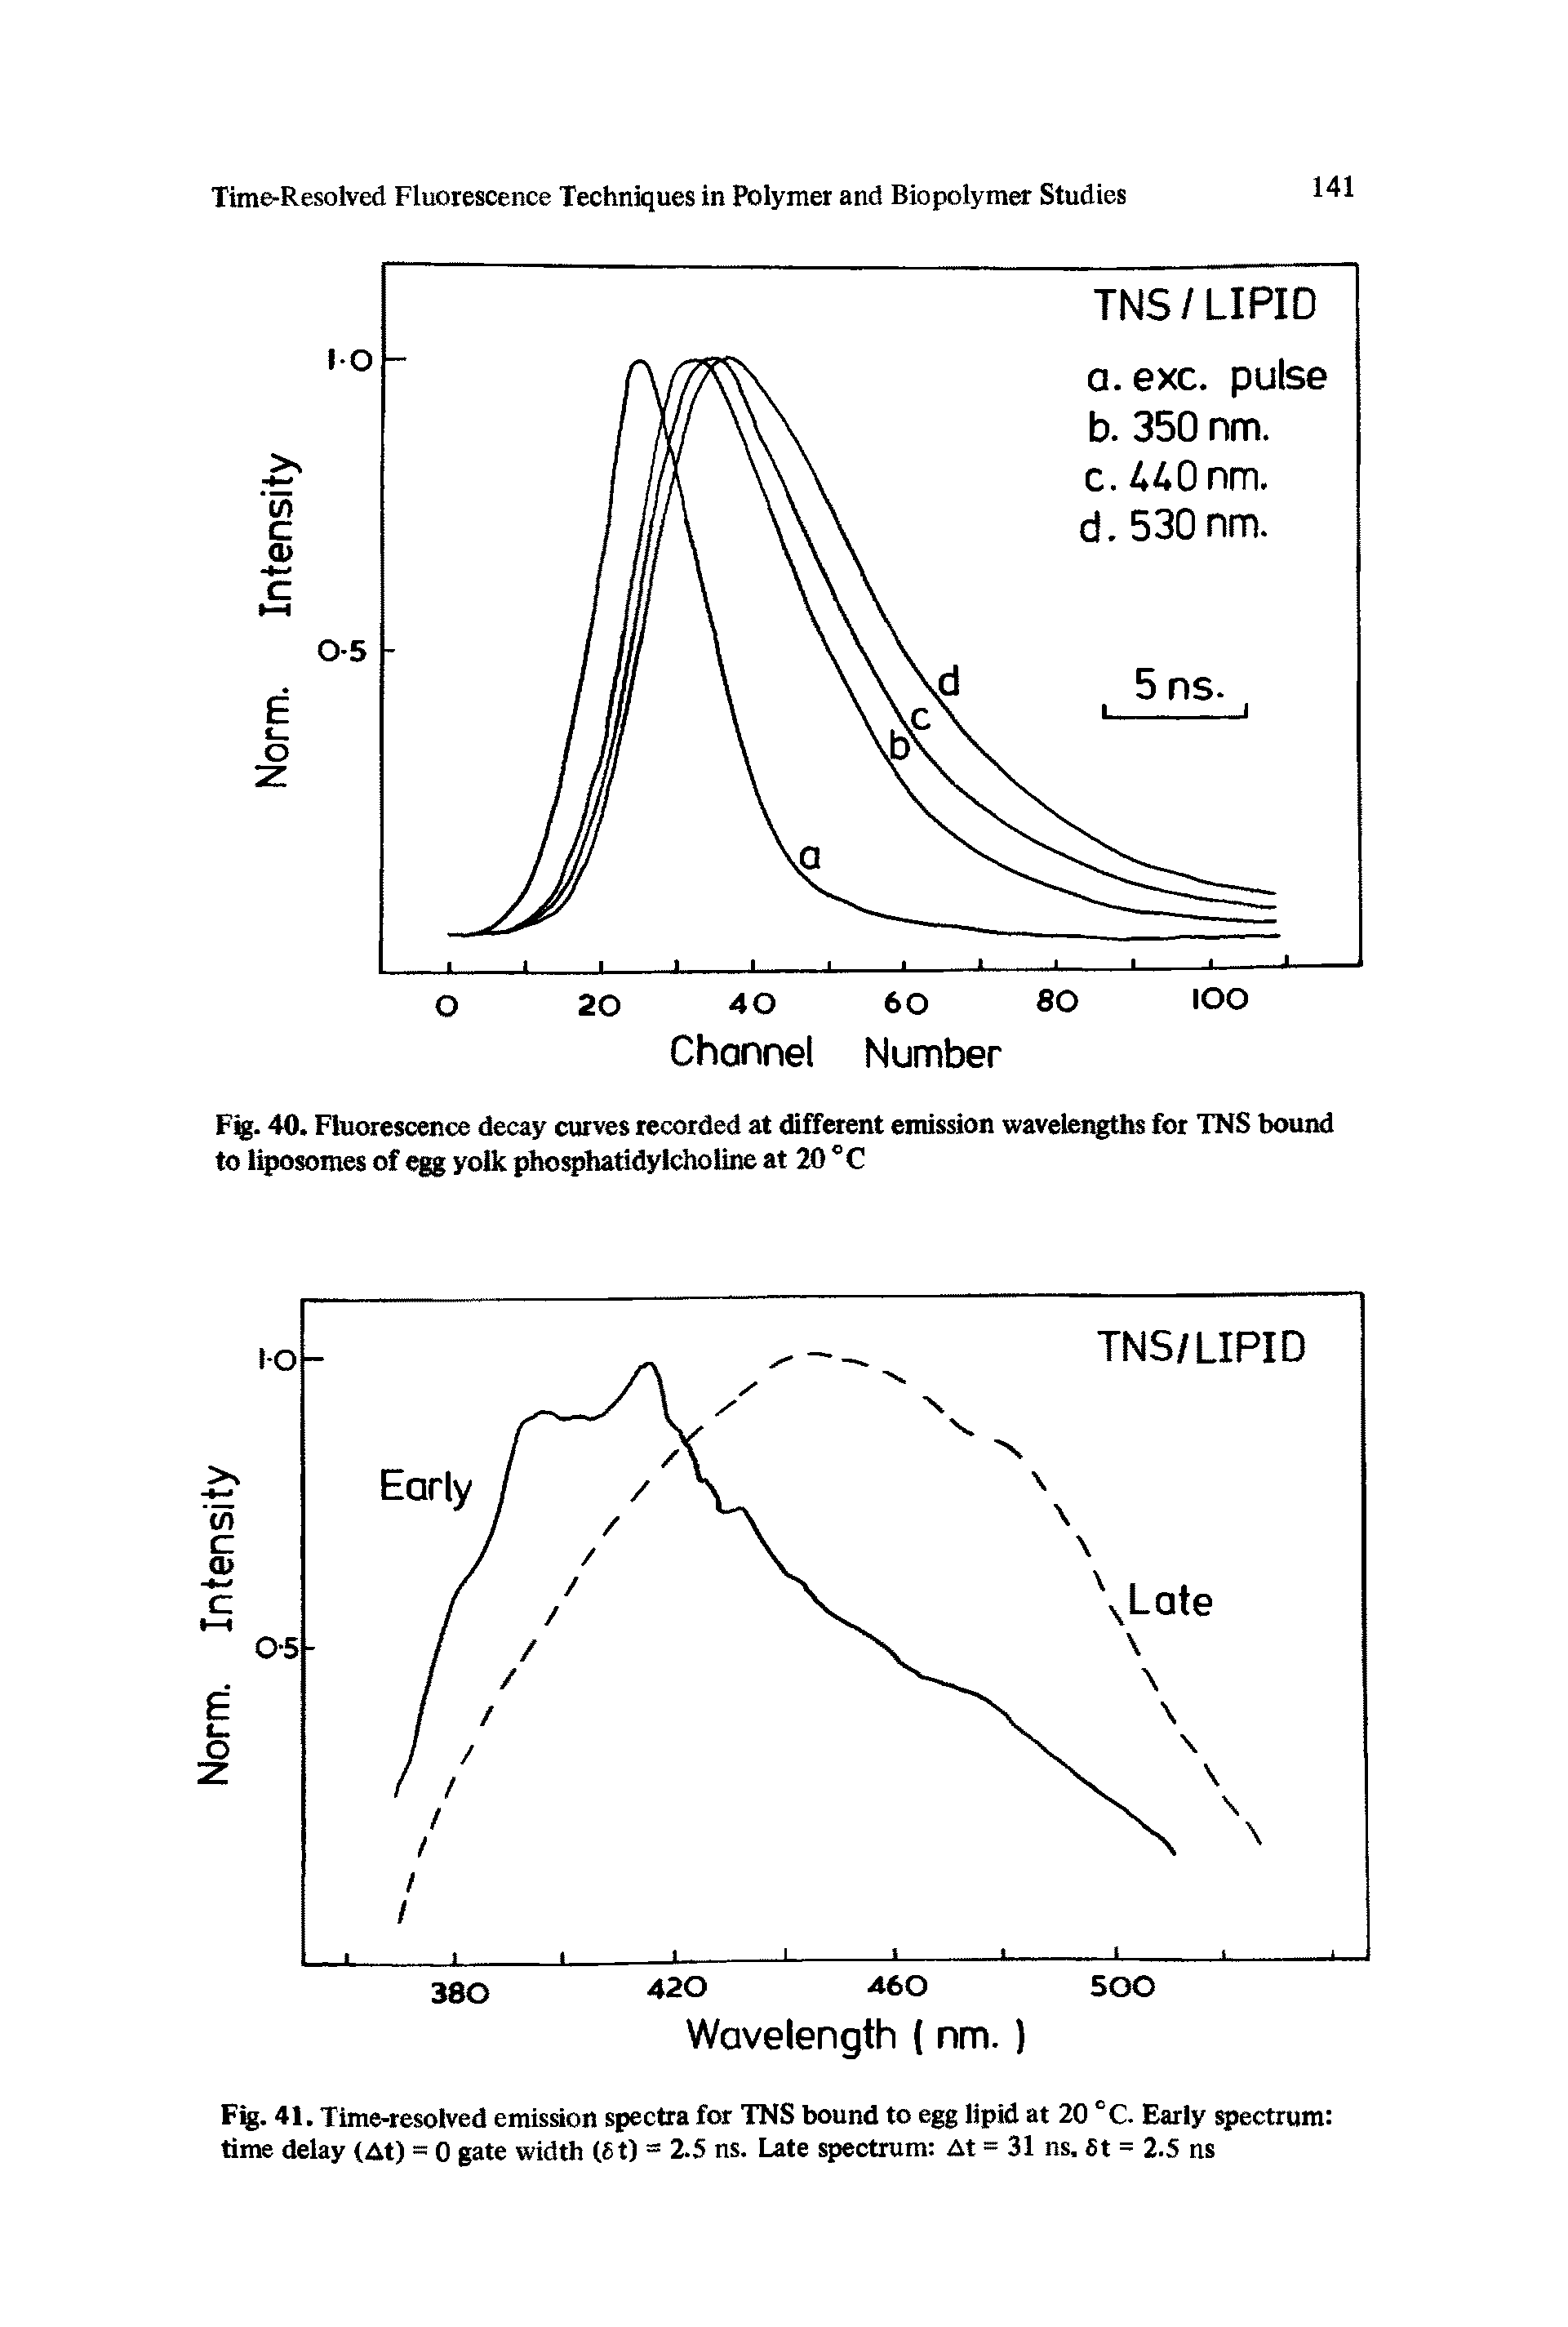 Fig. 41. Time-resolved emission spectra for TNS bound to egg lipid at 20 °C. Early spectrum time delay (At) = 0 gate width (8t) = 2.5 ns. Late spectrum At = 31 ns, 6t = 2.5 ns...